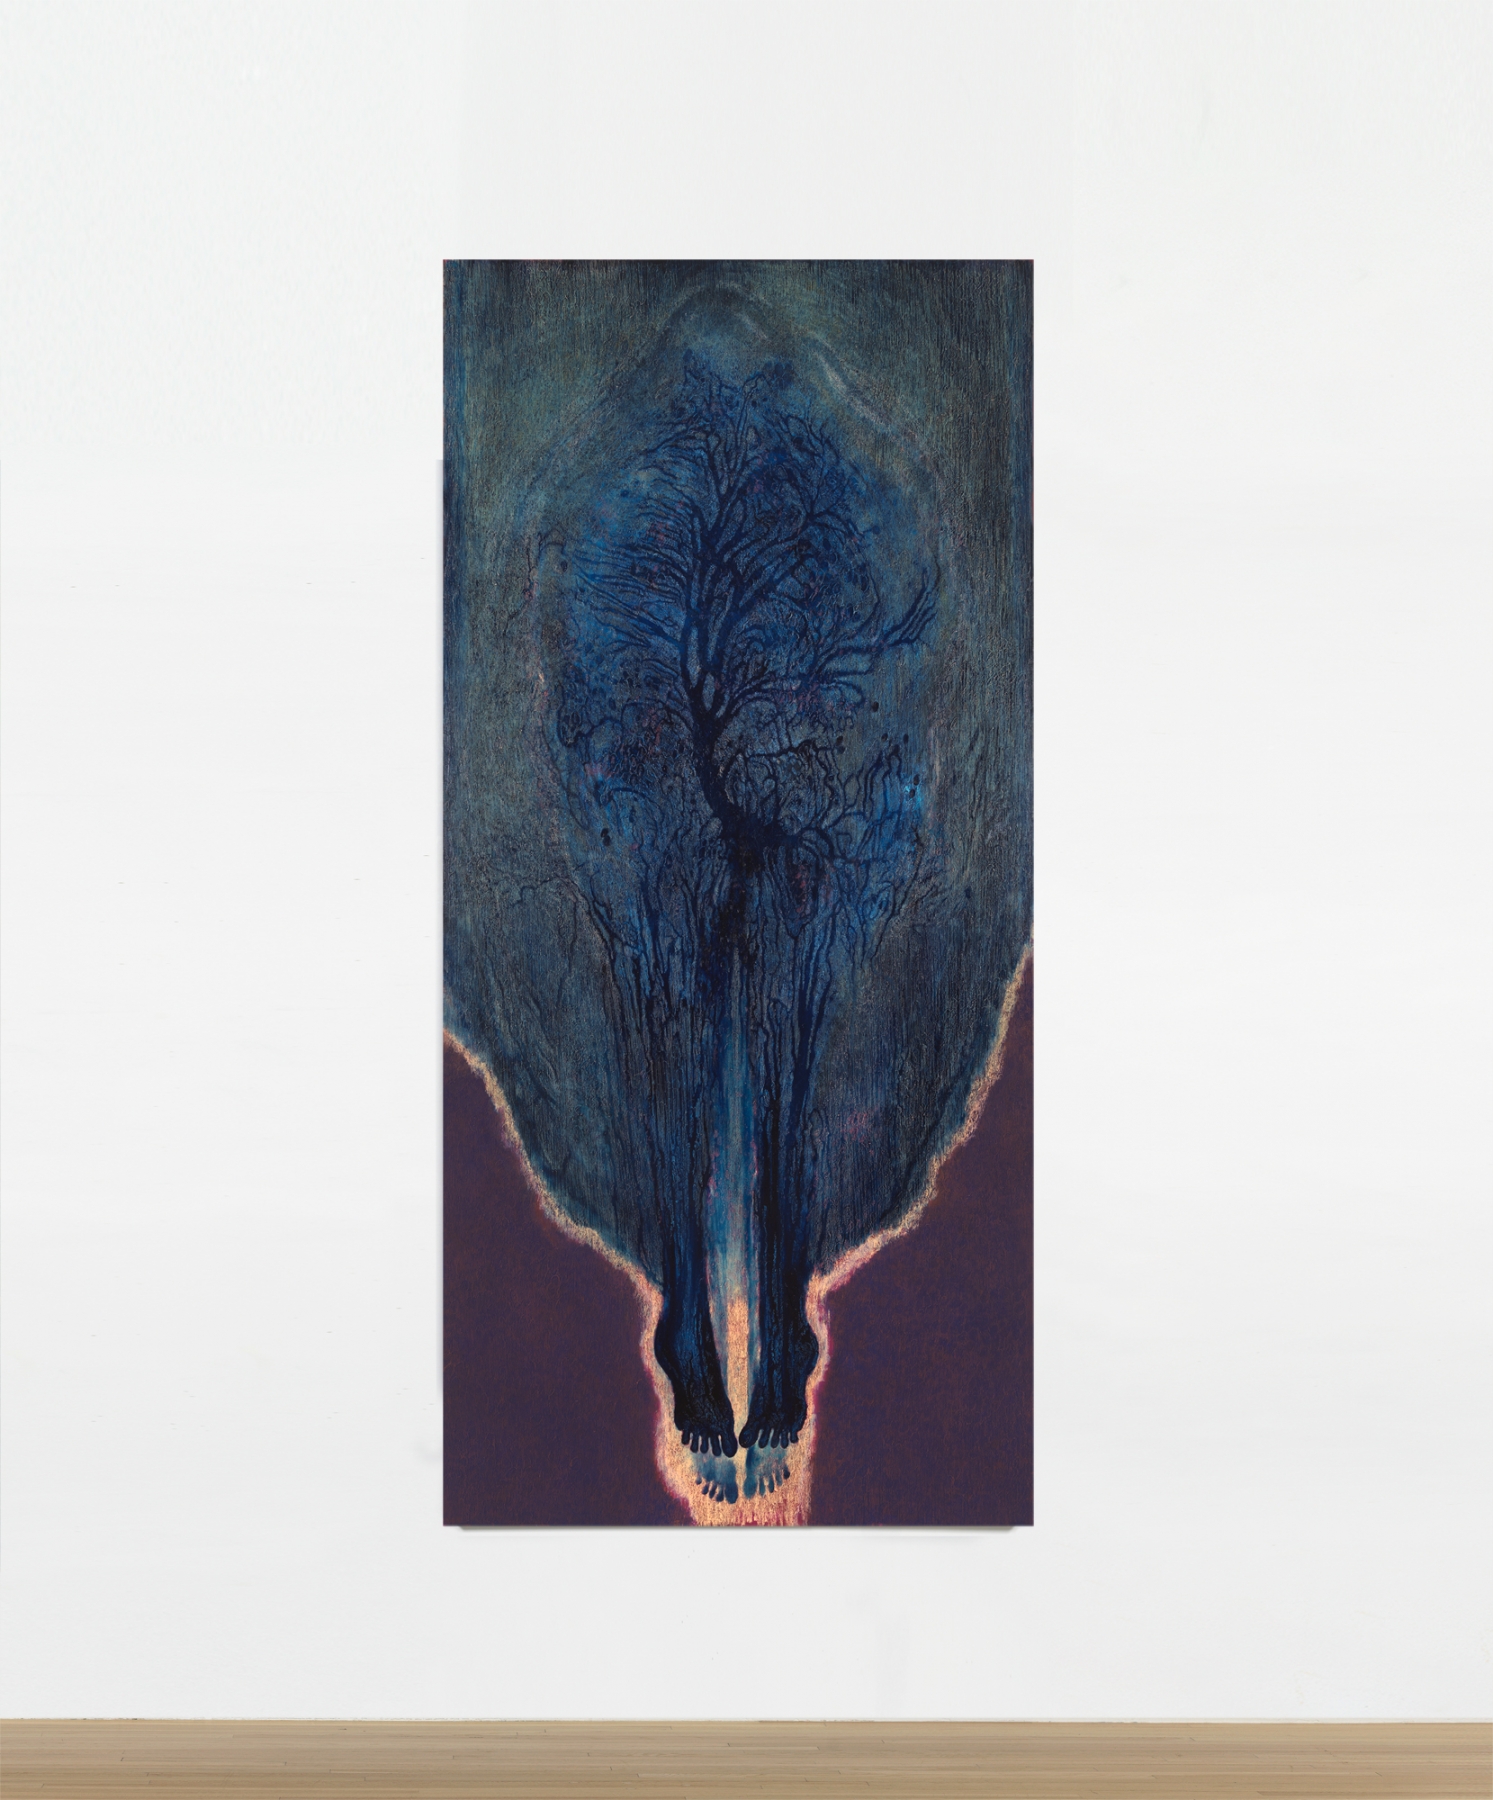 Luisa Rabbia
Ecstasy, 2019
Colored pencil, pastel, acrylic and oil on canvas
102 x 47 inches (260 x 119 cm)

Inquire